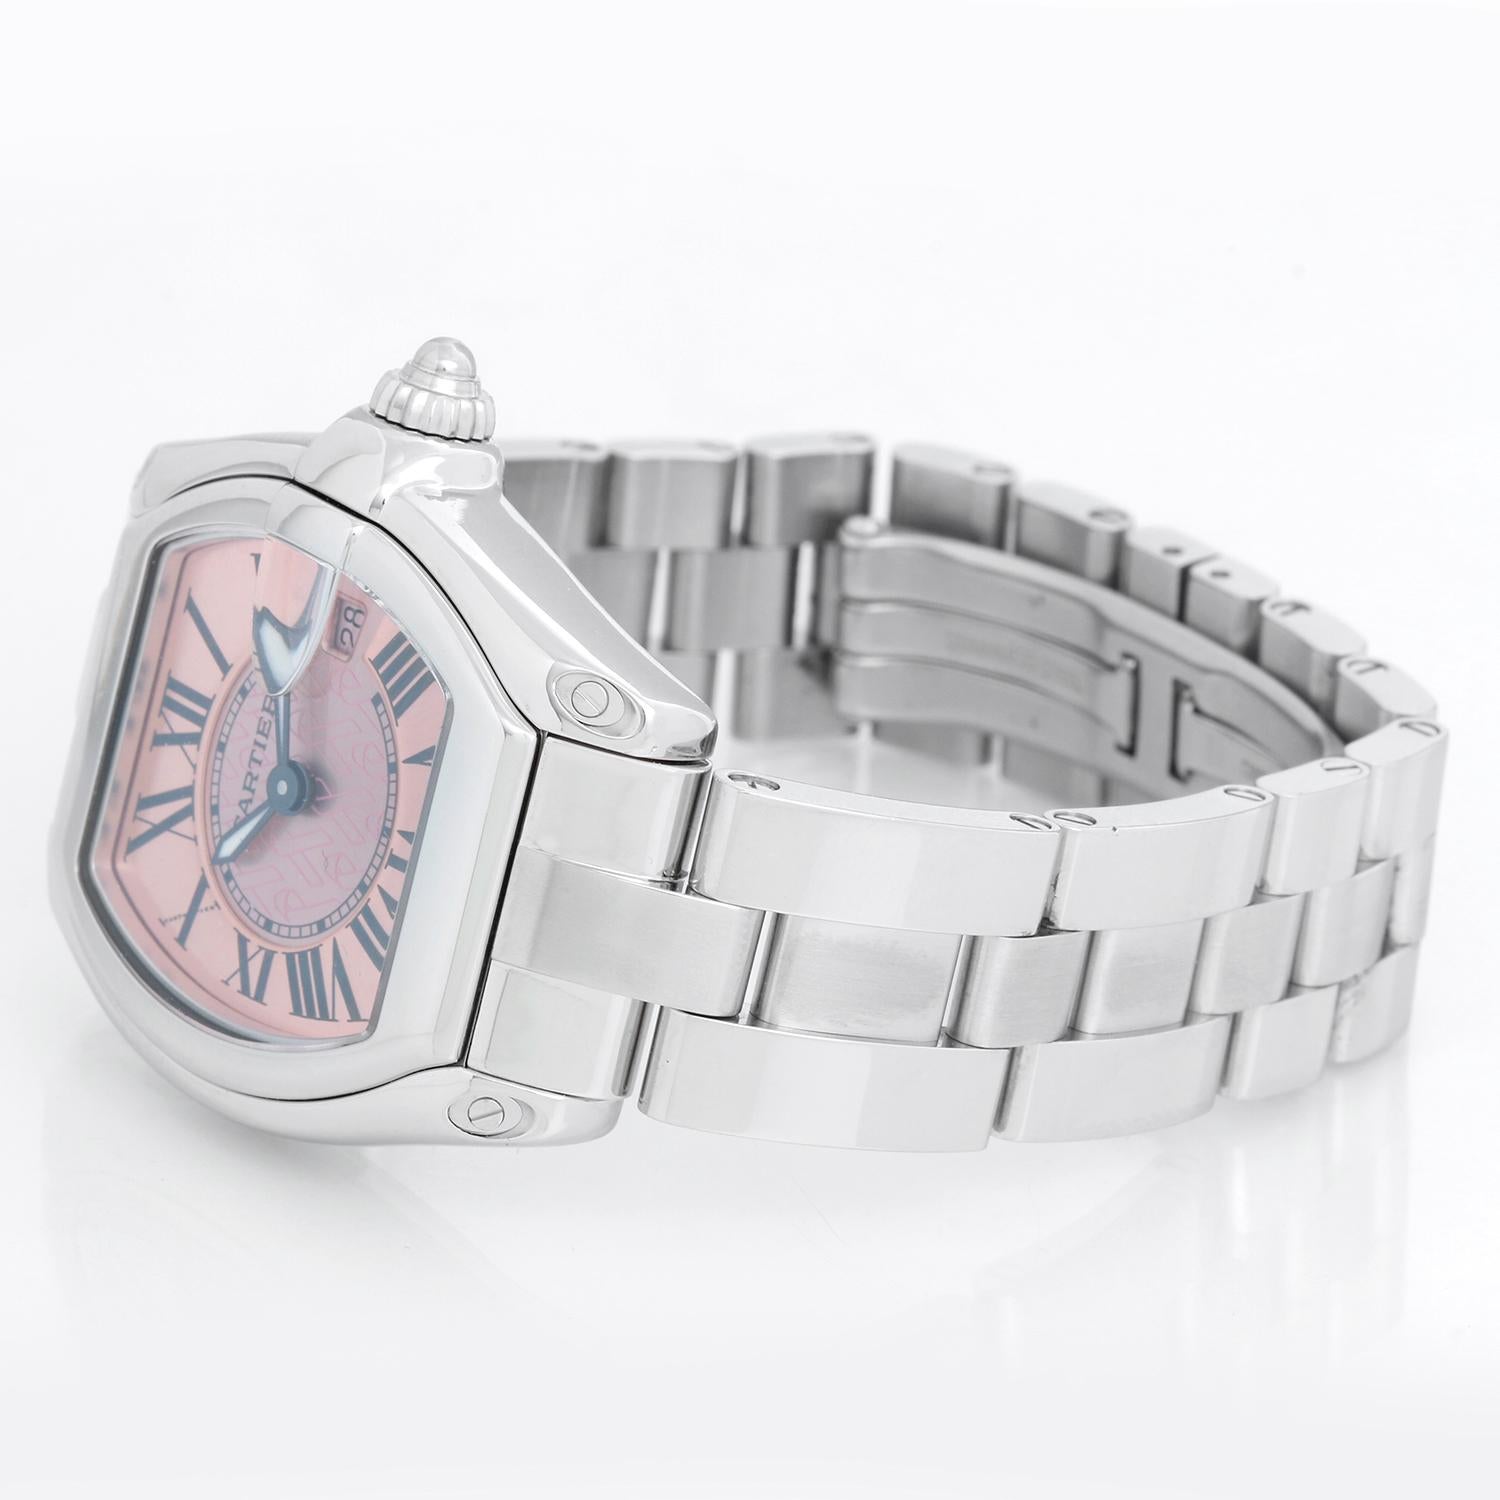 Cartier Roadster Stainless Steel Pink Ribbon Edition Ladies Watch W62016V3 - Quartz. Stainless steel tonneau style case ( 31 x 37 mm) . Pink guilloche dial with ribbons in the center ; date at 3 o'clock. Stainless steel Cartier bracelet with